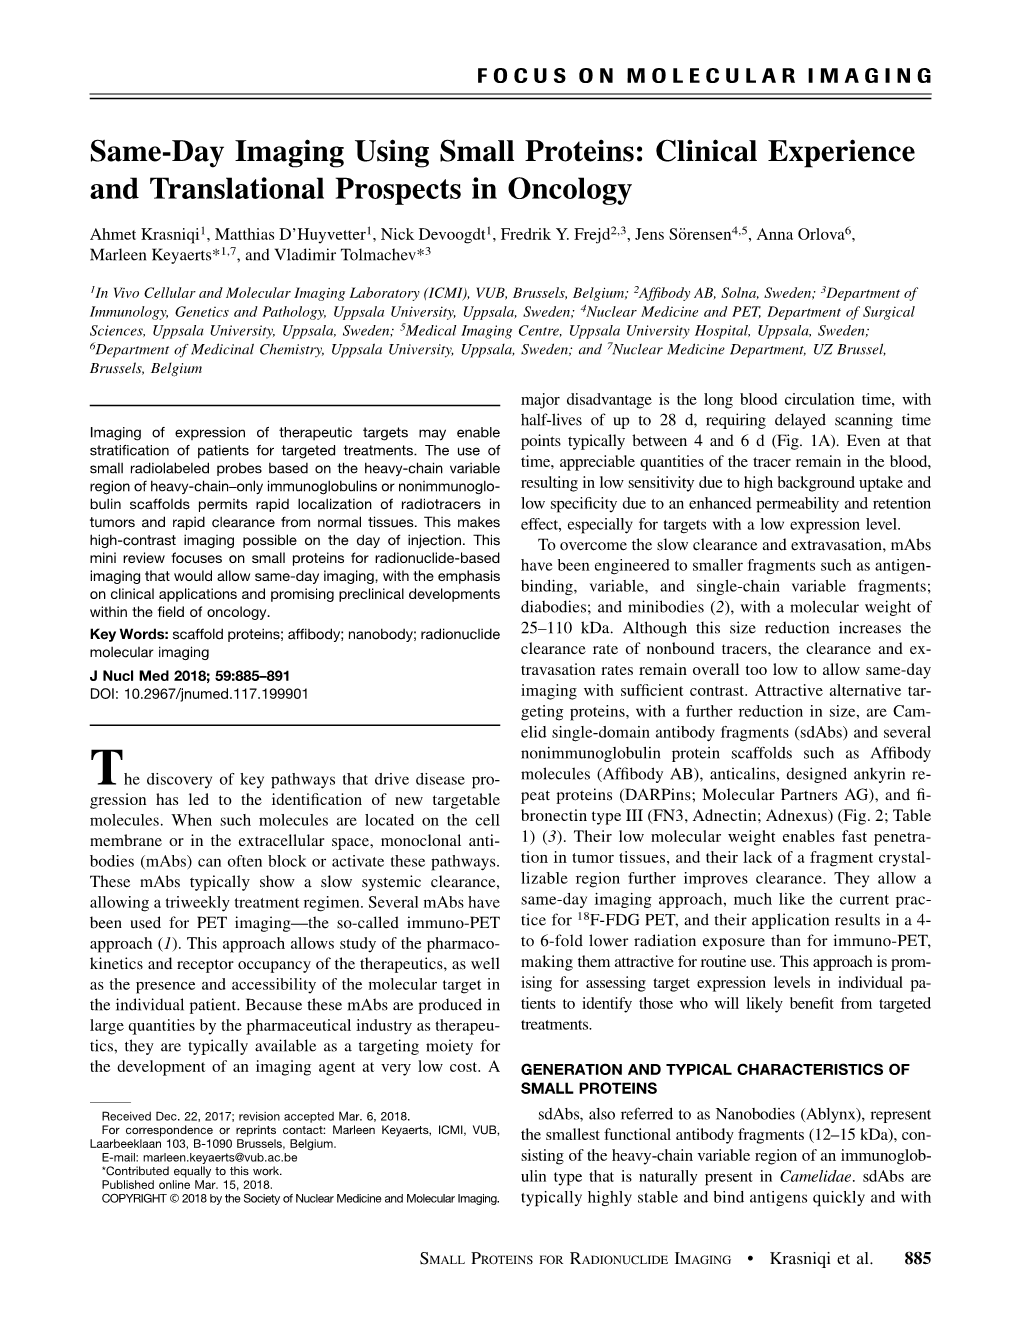 Same-Day Imaging Using Small Proteins: Clinical Experience and Translational Prospects in Oncology